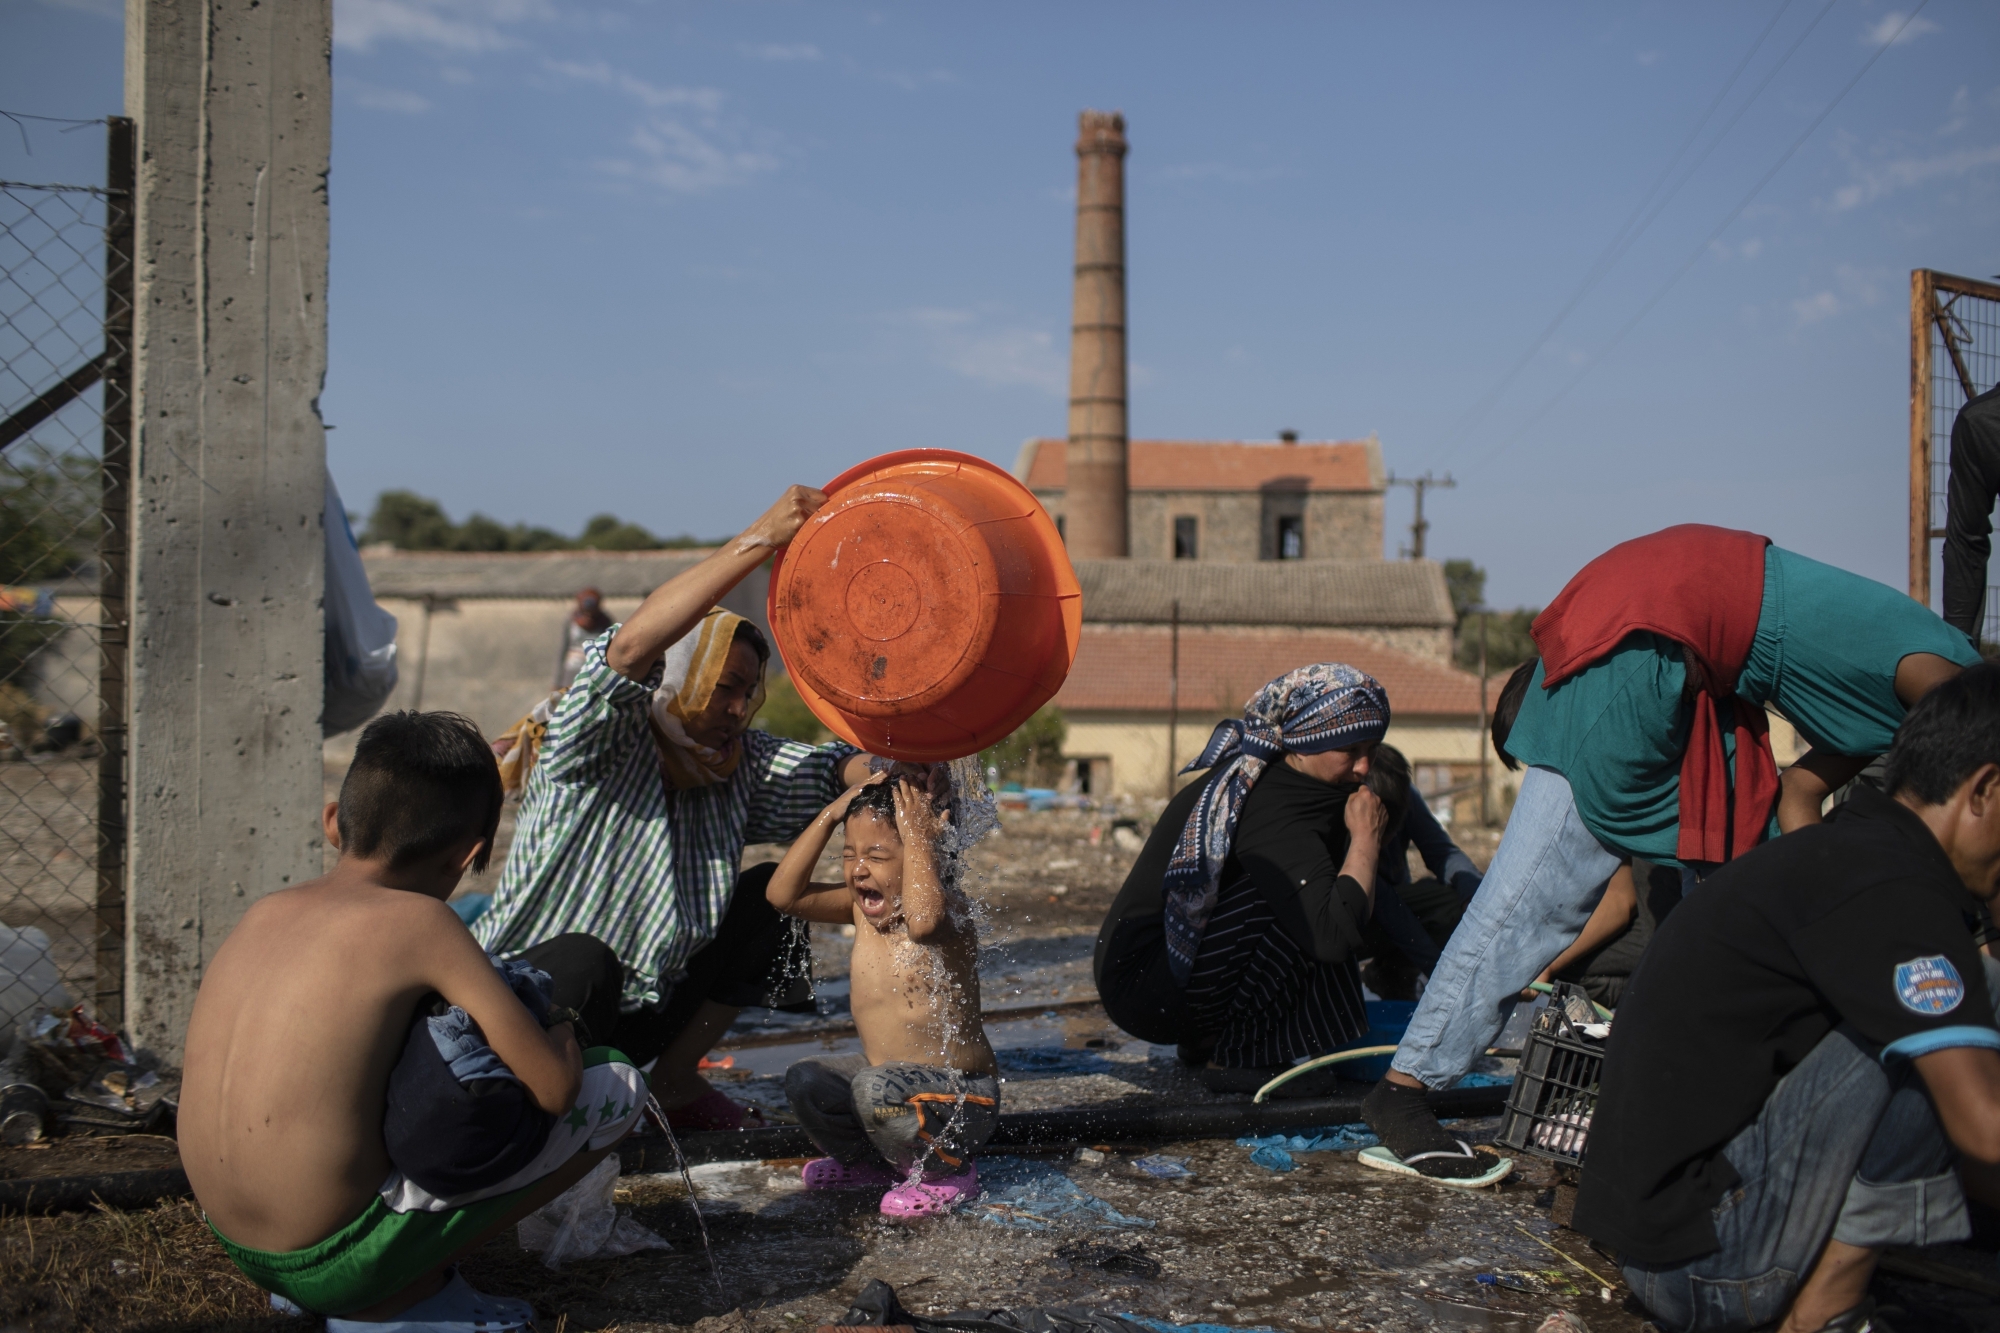 A woman washes a girl as migrants gather near Mytilene town, on the northeastern island of Lesbos, Greece, Saturday, Sept. 12, 2020. Greek authorities have been scrambling to find a way to house more than 12,000 people left in need of emergency shelter on the island after the fires deliberately set on Tuesday and Wednesday night gutted the Moria refugee camp. (AP Photo/Petros Giannakouris) ArcInfo